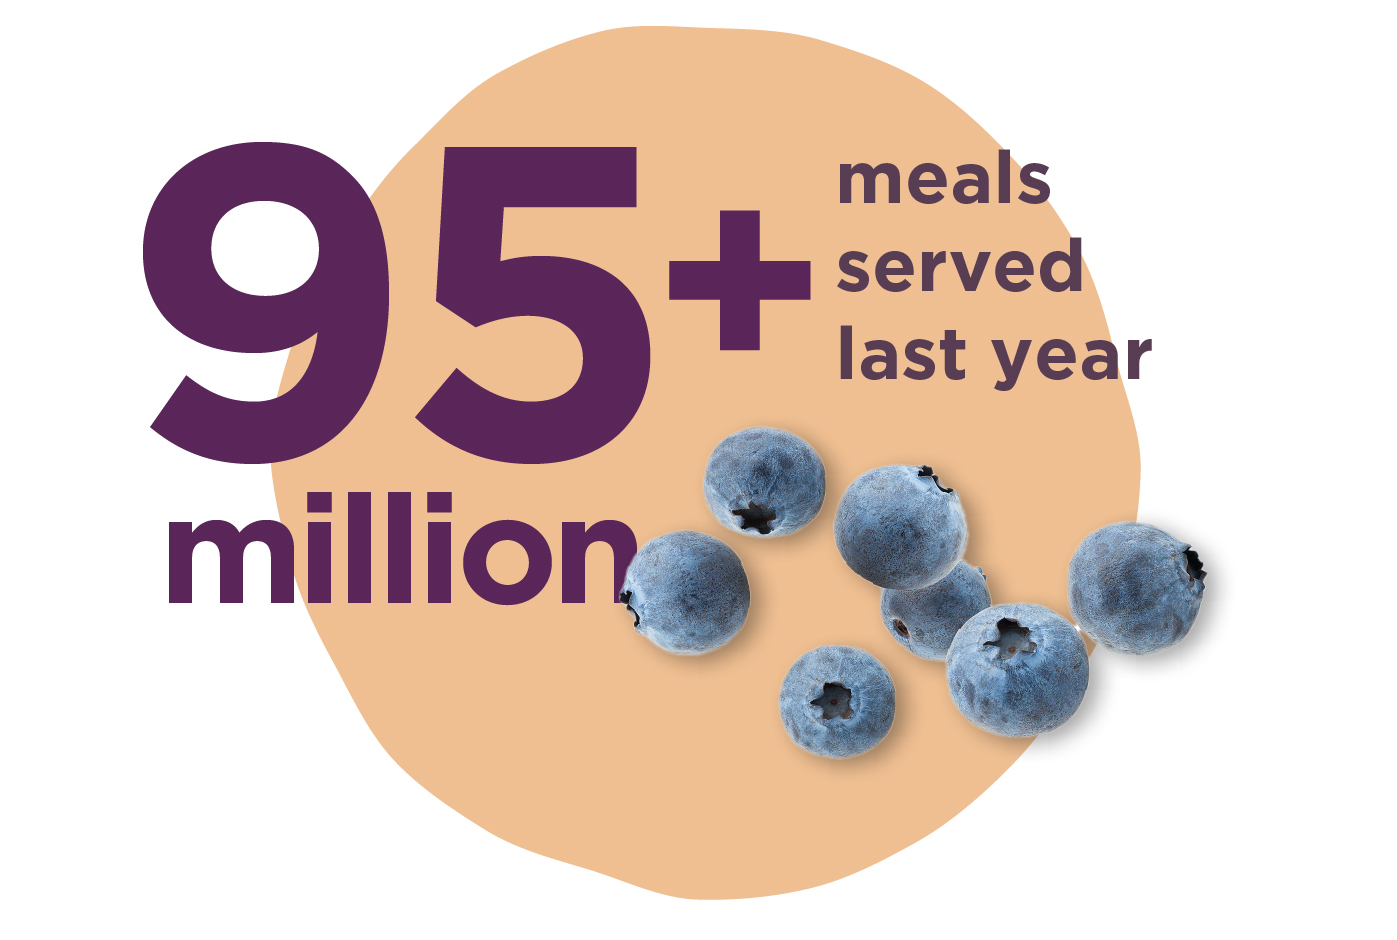 Graphic stating 95M+ meals served last year